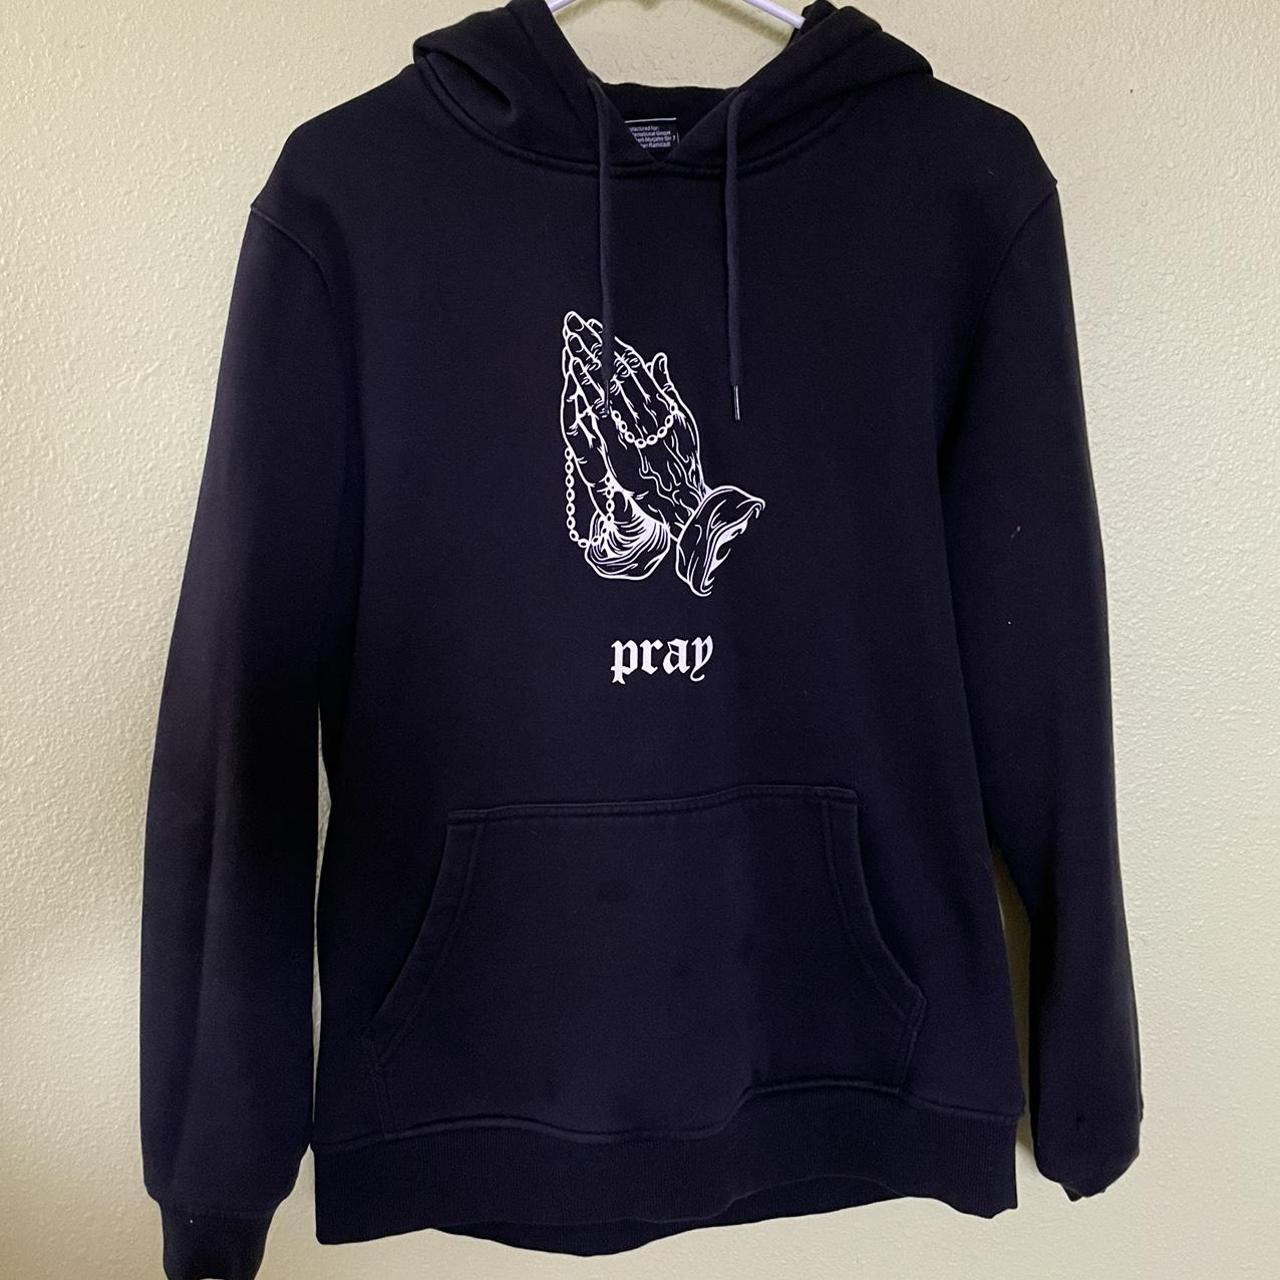 Product Image 1 - “Mister Tee” Hoodie
Size: Large

*sold as